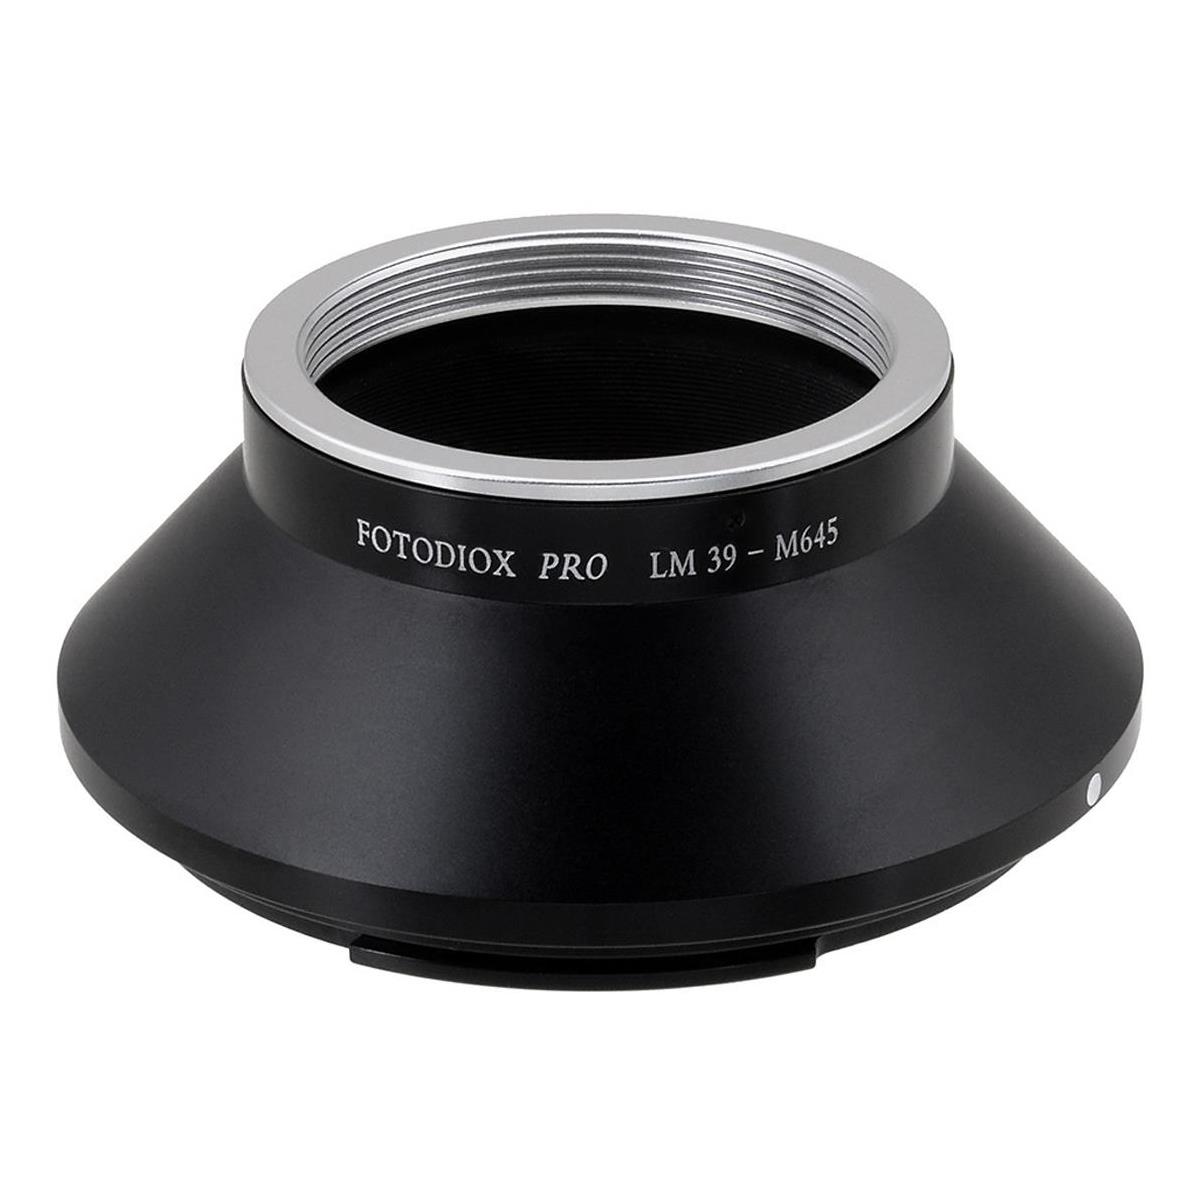 Image of Fotodiox Mount Adapter for Leica M39 Lens to Mamiya 645 Camera